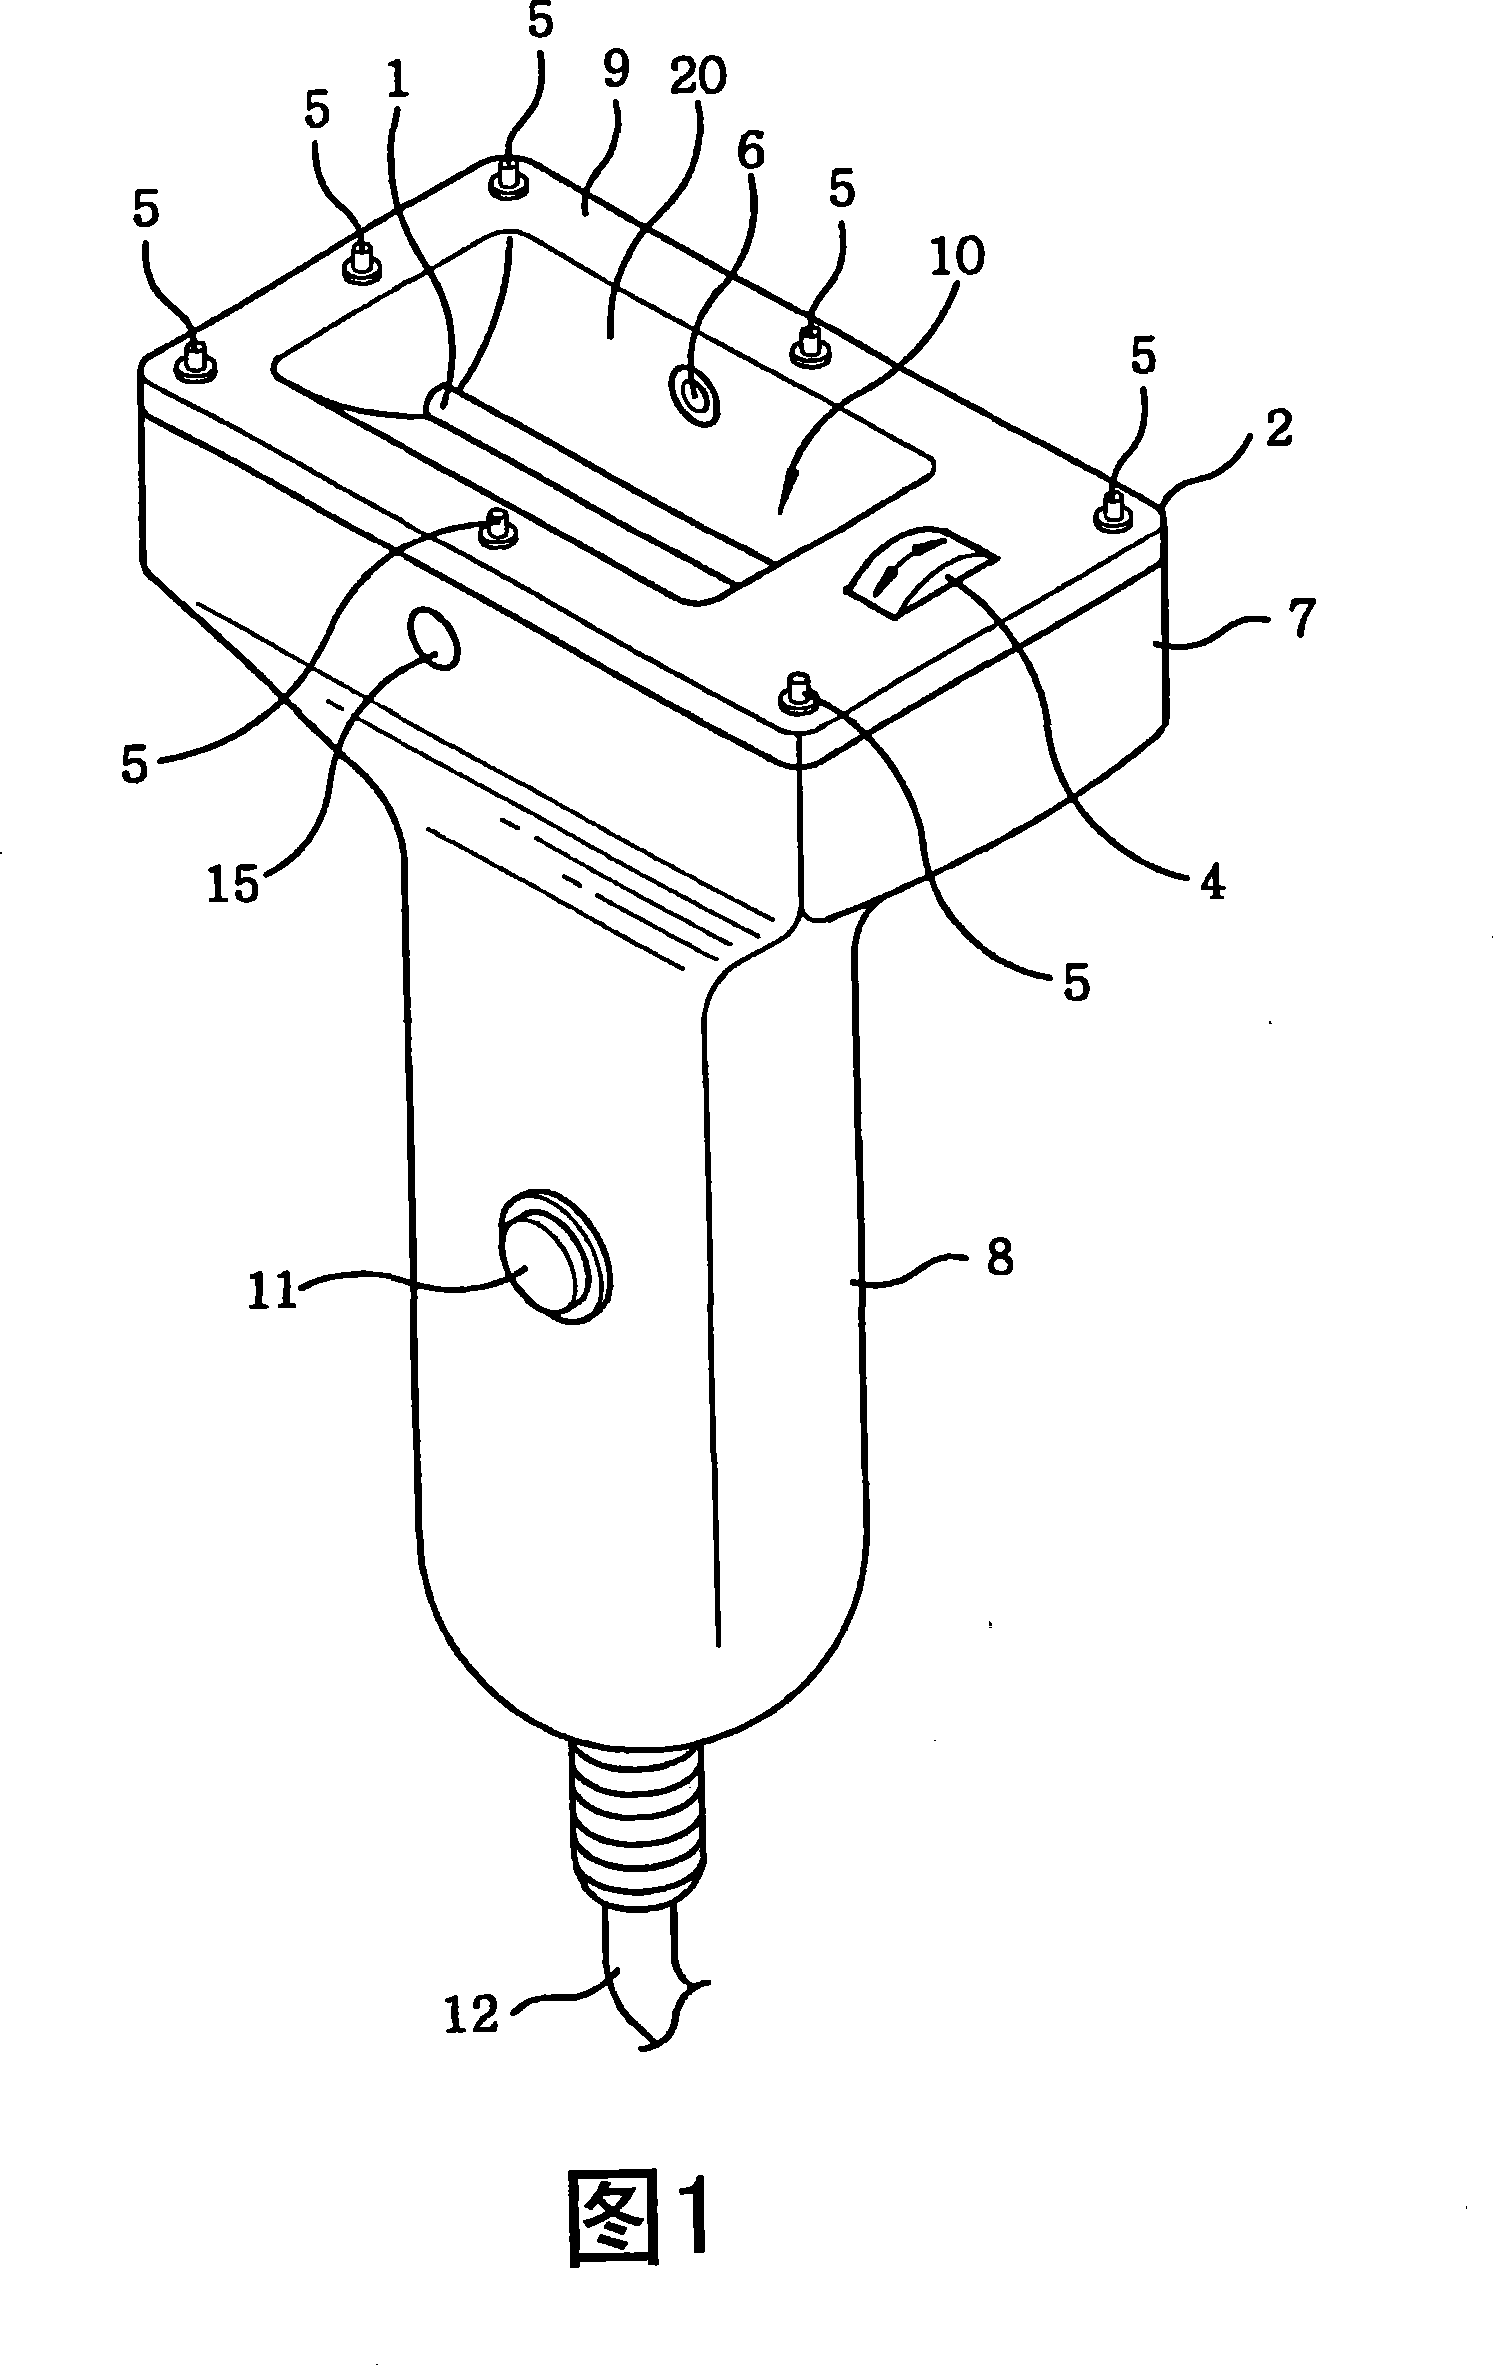 Optical hair removing device